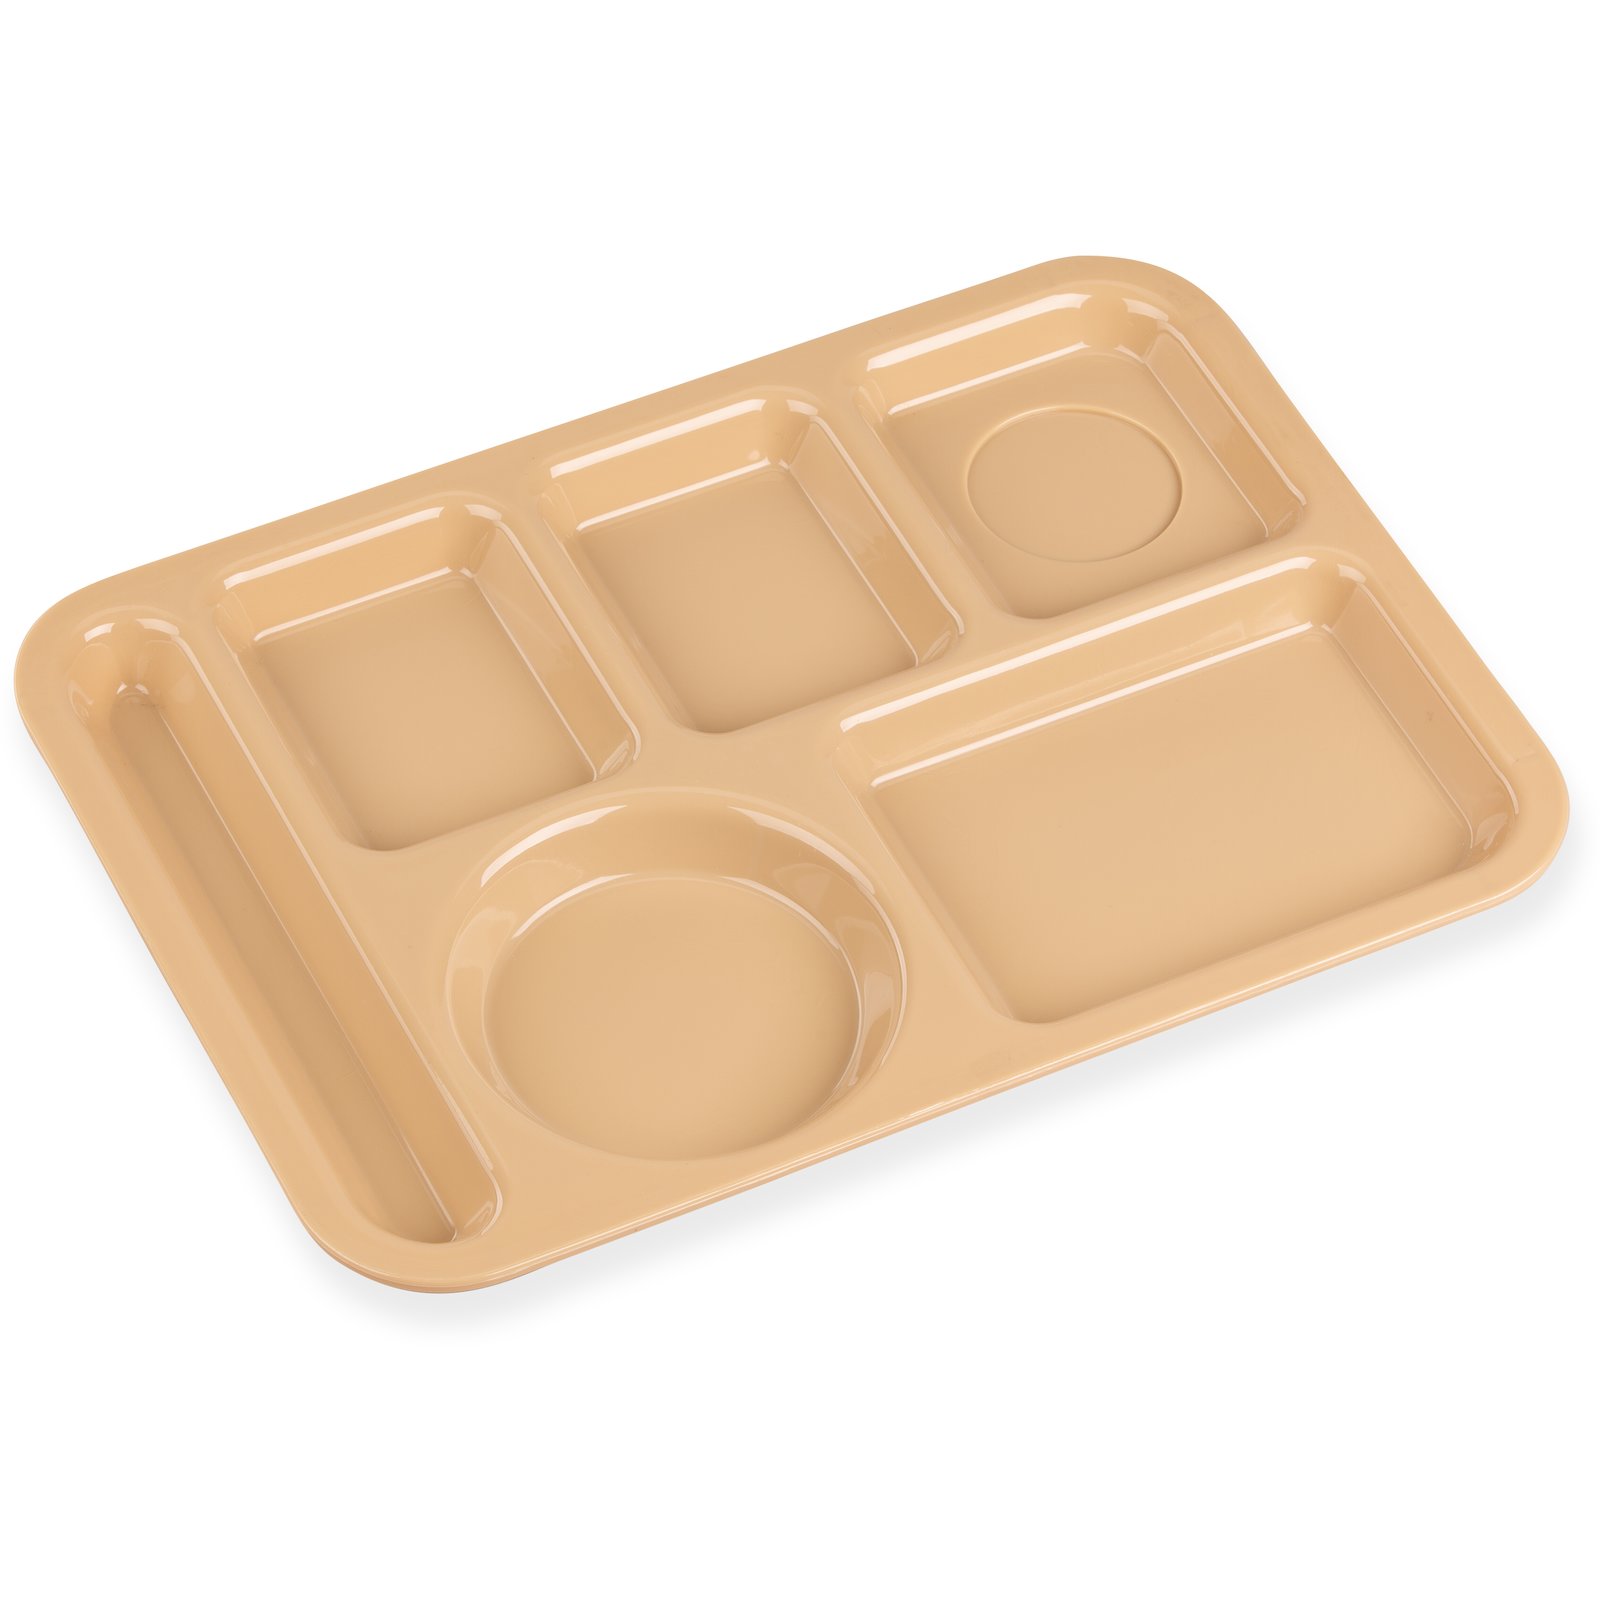 Cranberry, 2×2 Co-Polymer 6-Compartment Cafeteria Trays, 24/PK